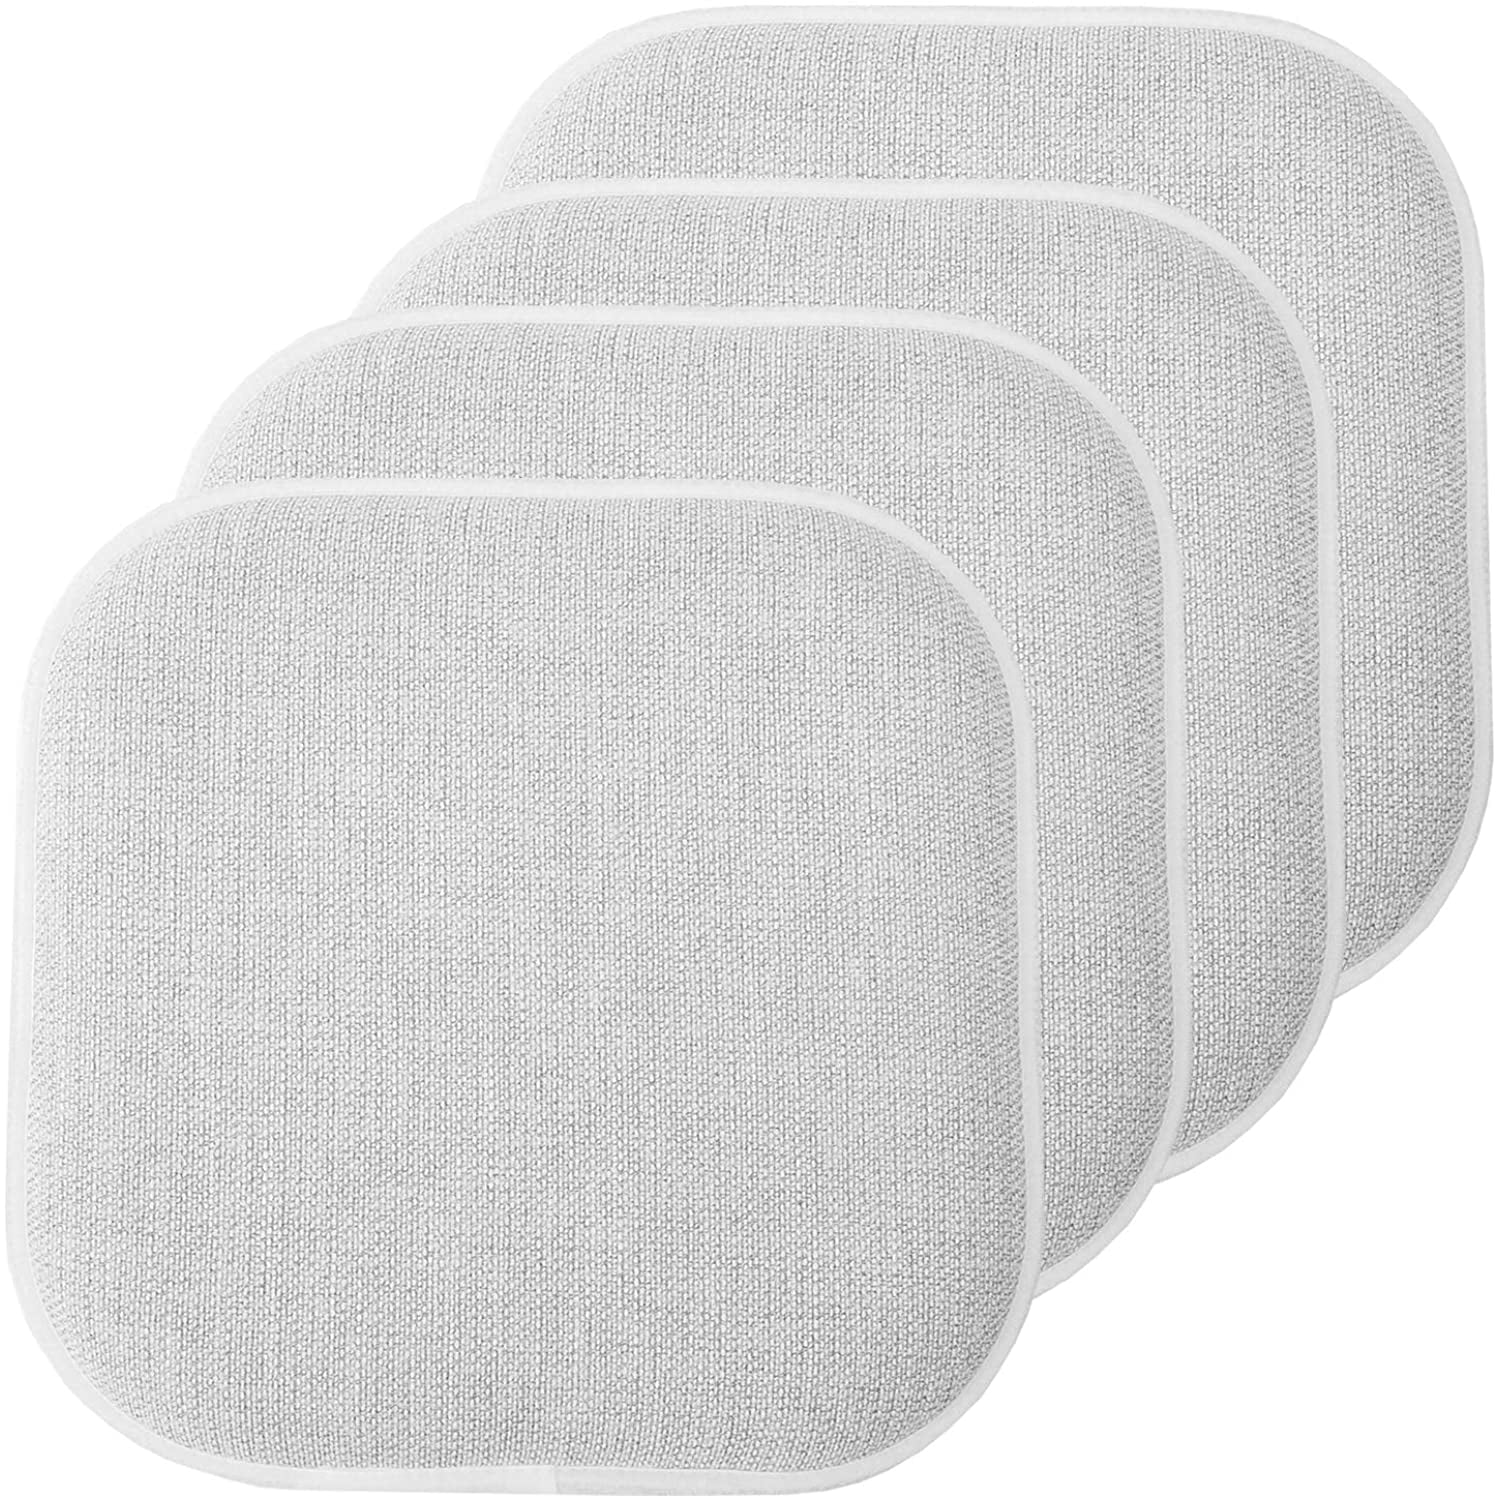 Sweet Home Collection Chair Cushion Memory Foam Pads Honeycomb Pattern Slip Non Skid Rubber Back Rounded Square 16 x 16 Seat Cover Alexis Linen/Beige 4 Pack